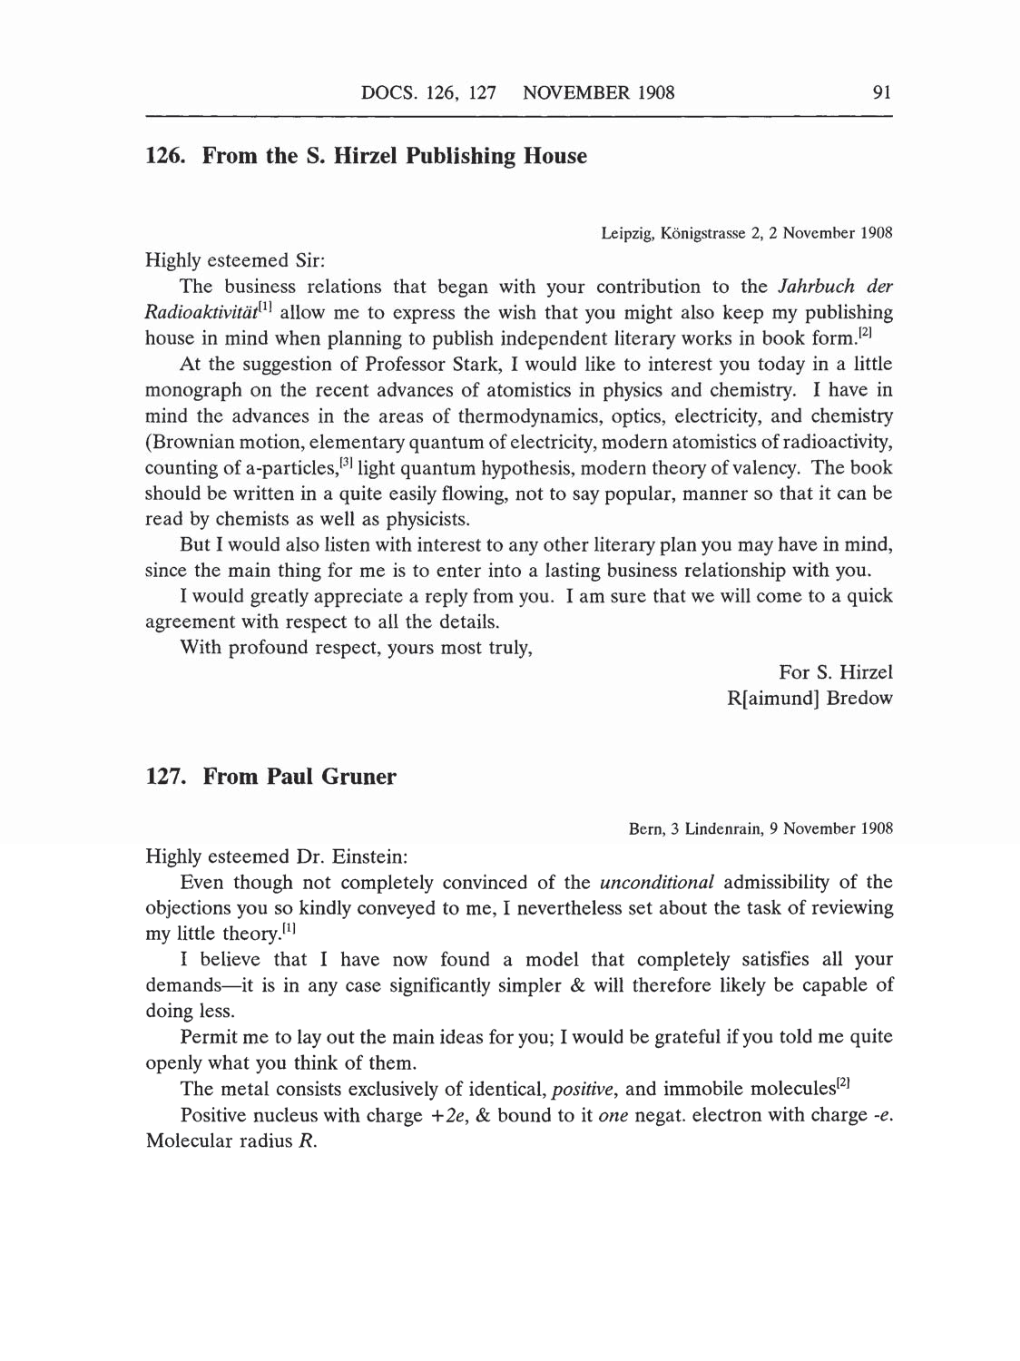 Volume 5: The Swiss Years: Correspondence, 1902-1914 (English translation supplement) page 91